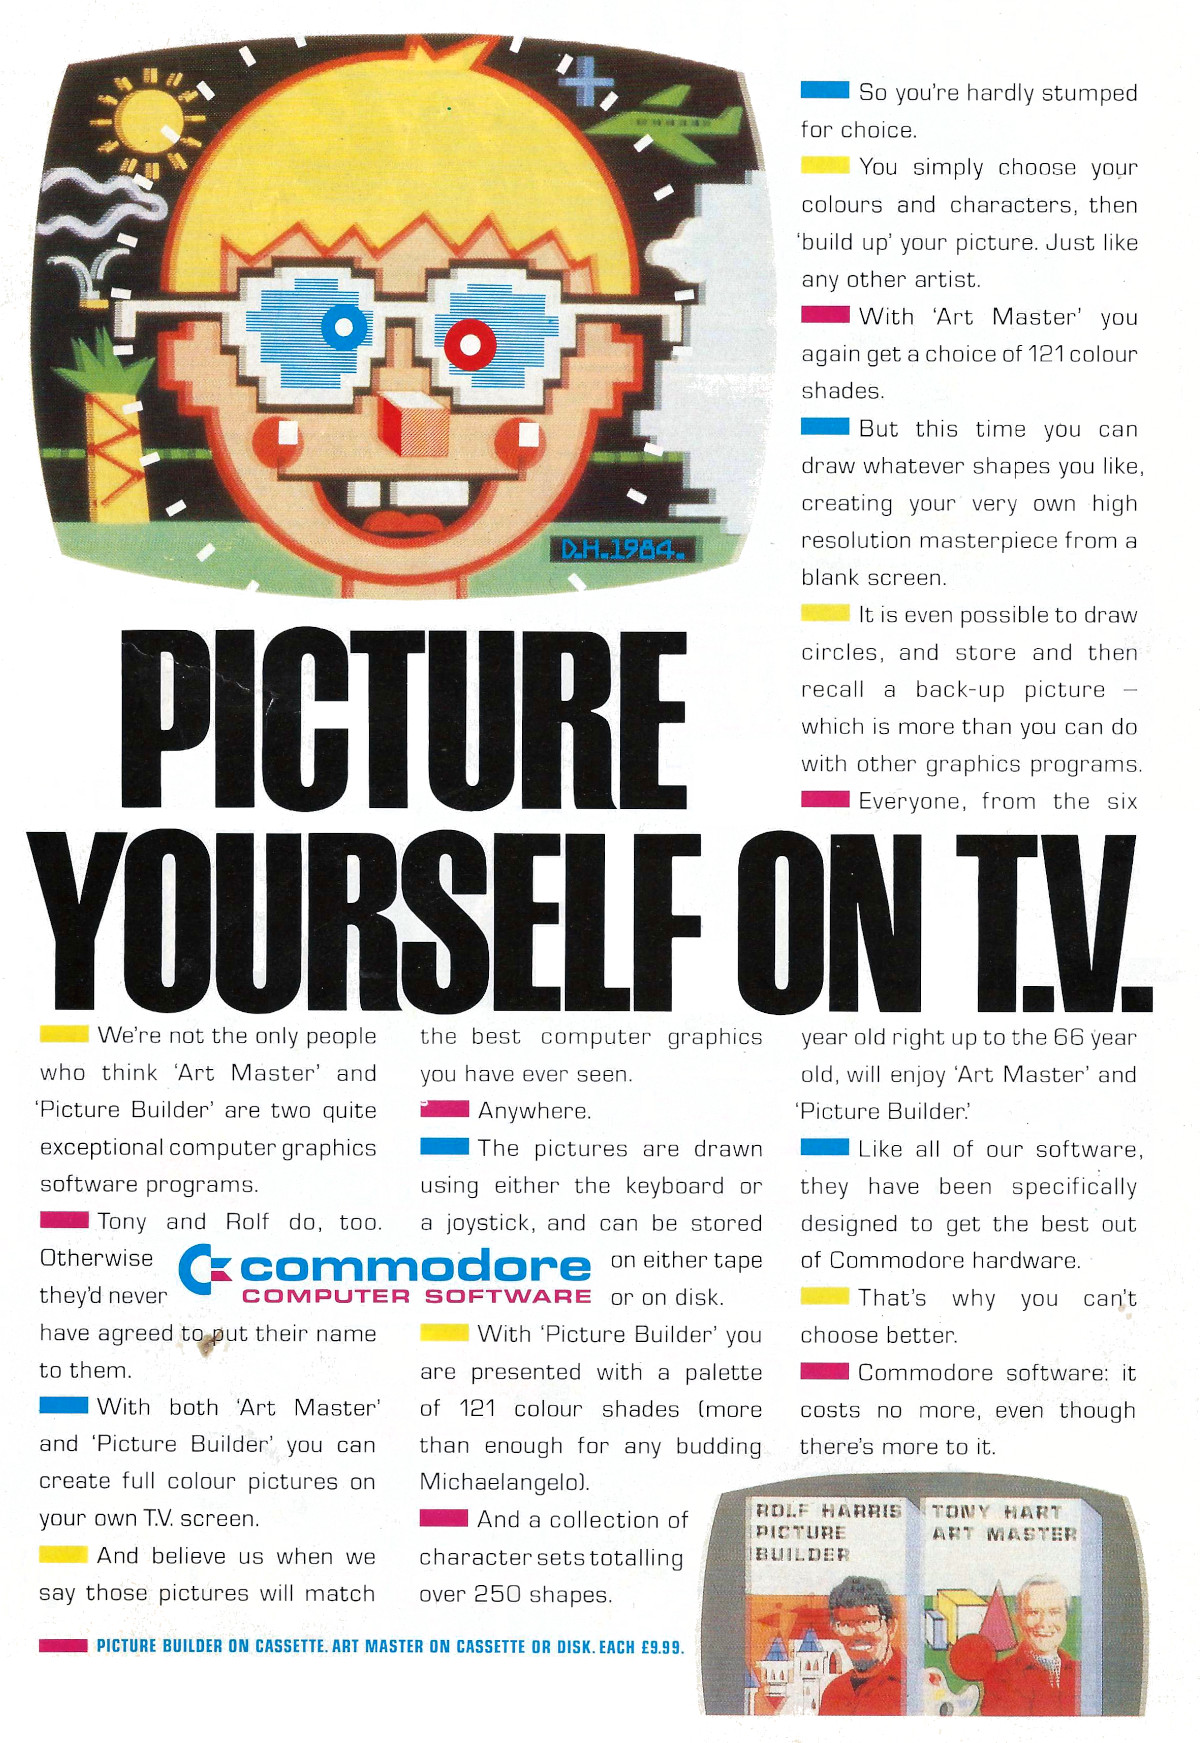 A Commodore Computer Software advert showing <span class='hilite'>Rolf Harris</span>'s Picture Builder and Tony Hart's Art Master. From Commodore Computing International, November 1984